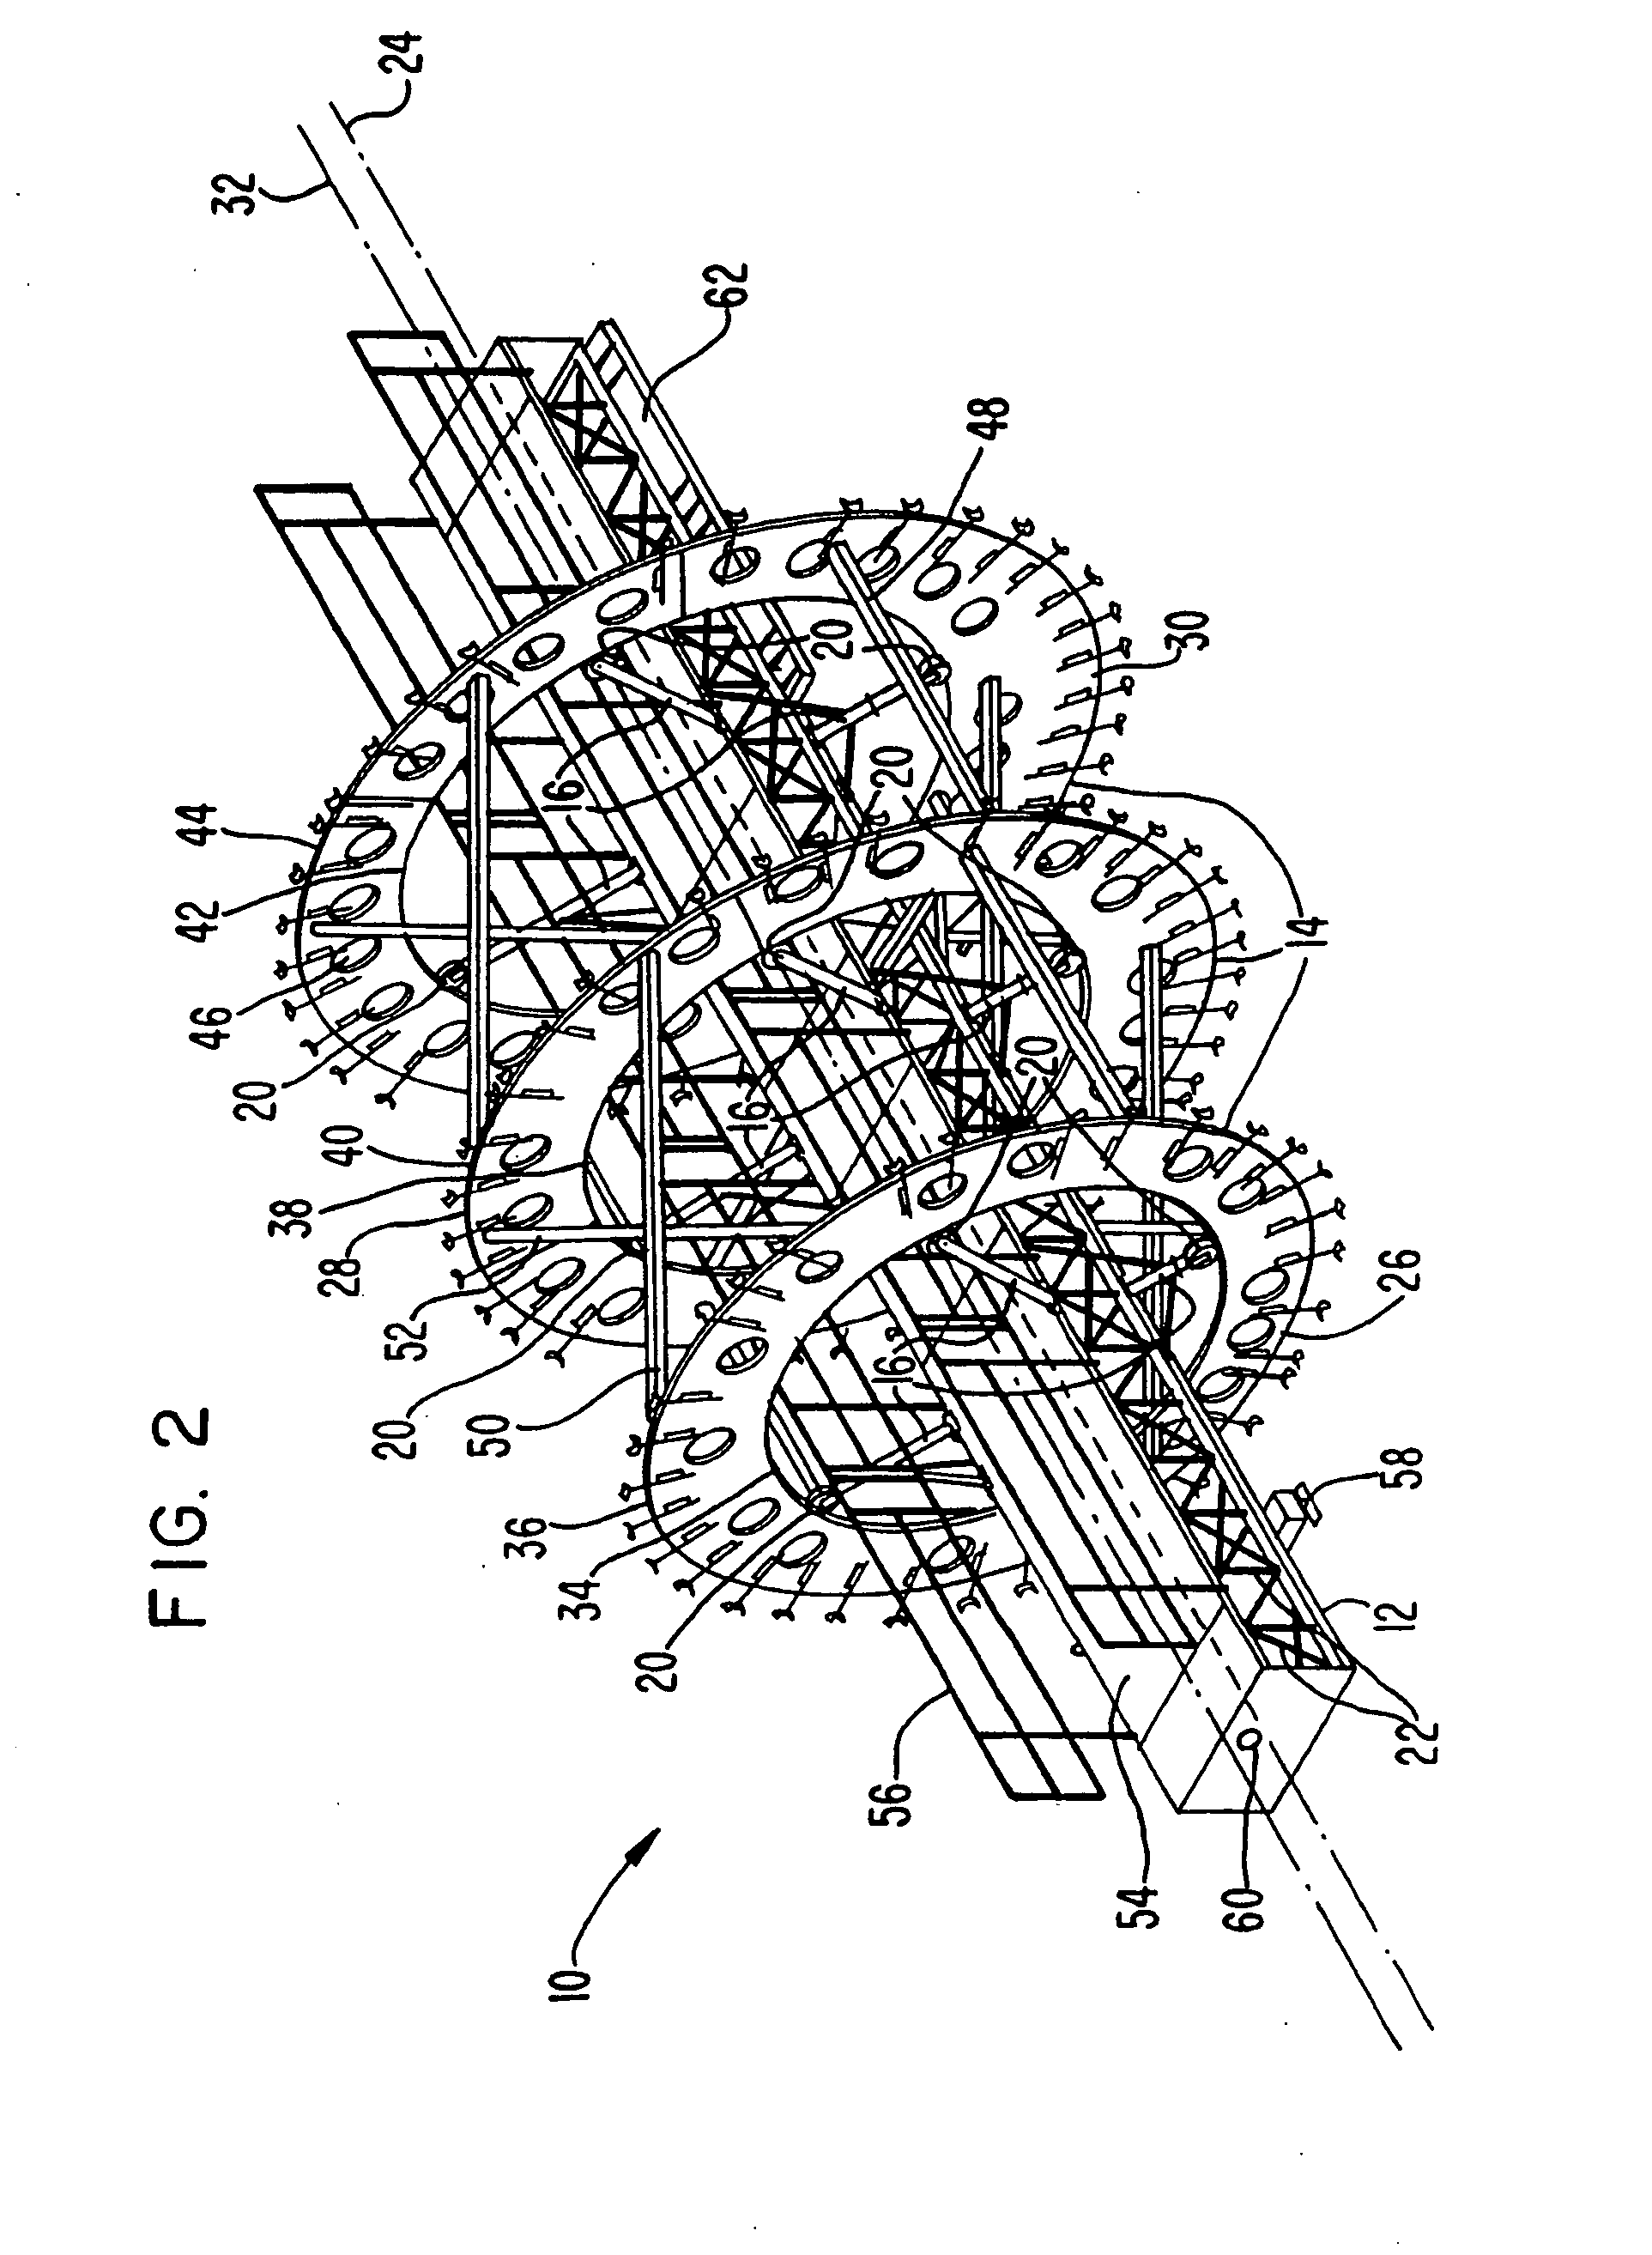 Rotating internal support apparatus and method for large hollow structures